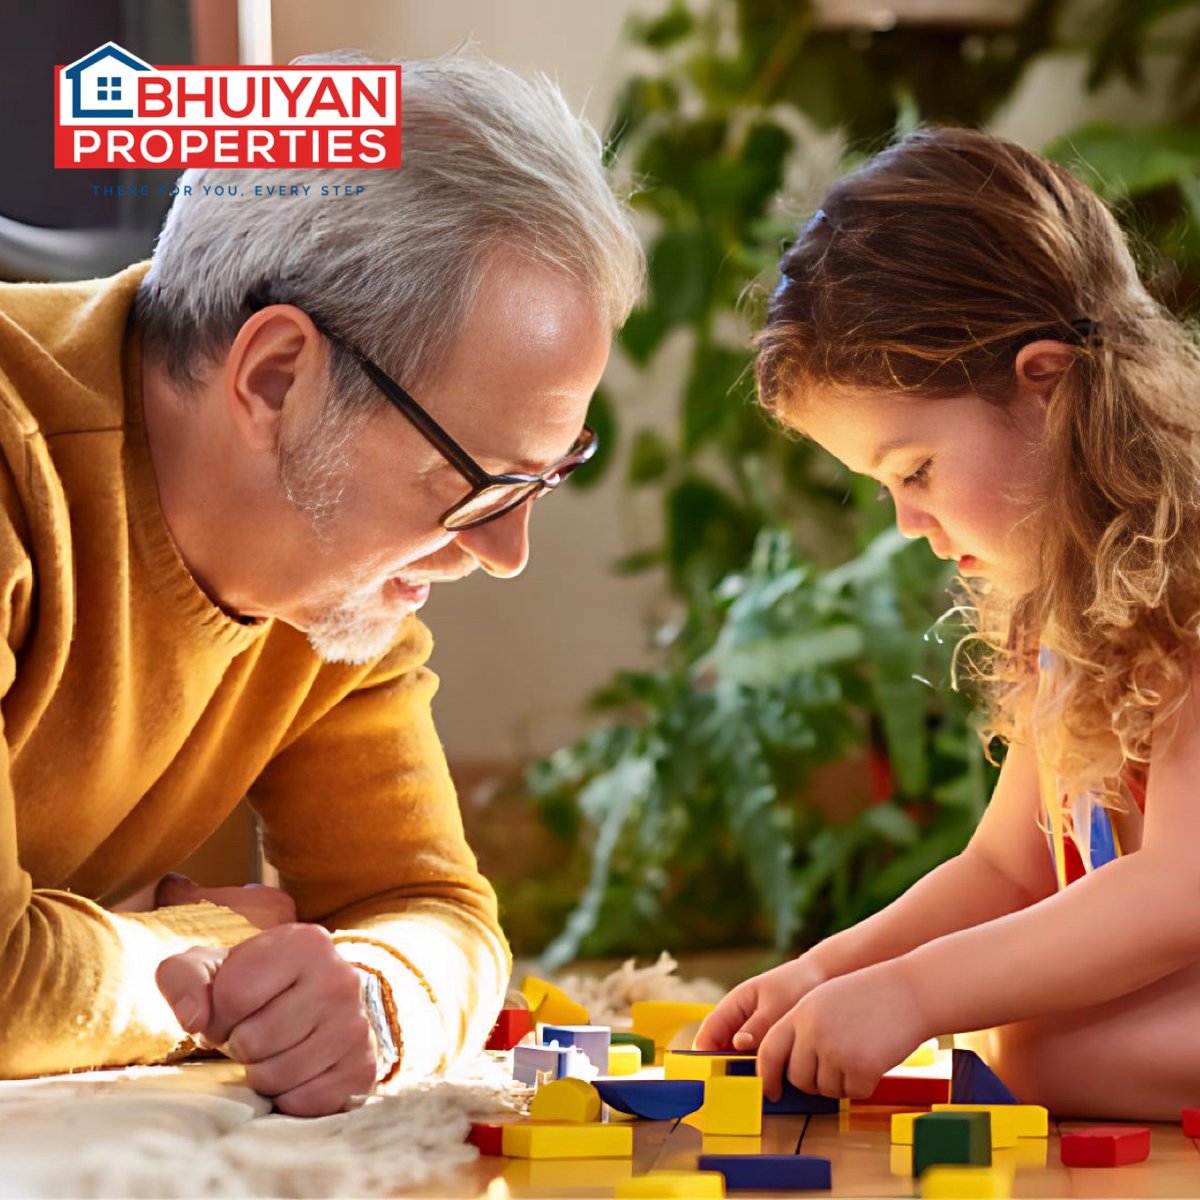 🏡 Considering multi-generational living in Staten Island? 🤔 Discover the perks and practicalities of sharing a home with loved ones. 💖Let's explore the possibilities together! 🌟

bhuiyan.link/tqz
#StatenIsland #MultiGenerationalLiving #RealEstate 🏠👨‍👩‍👦‍👦